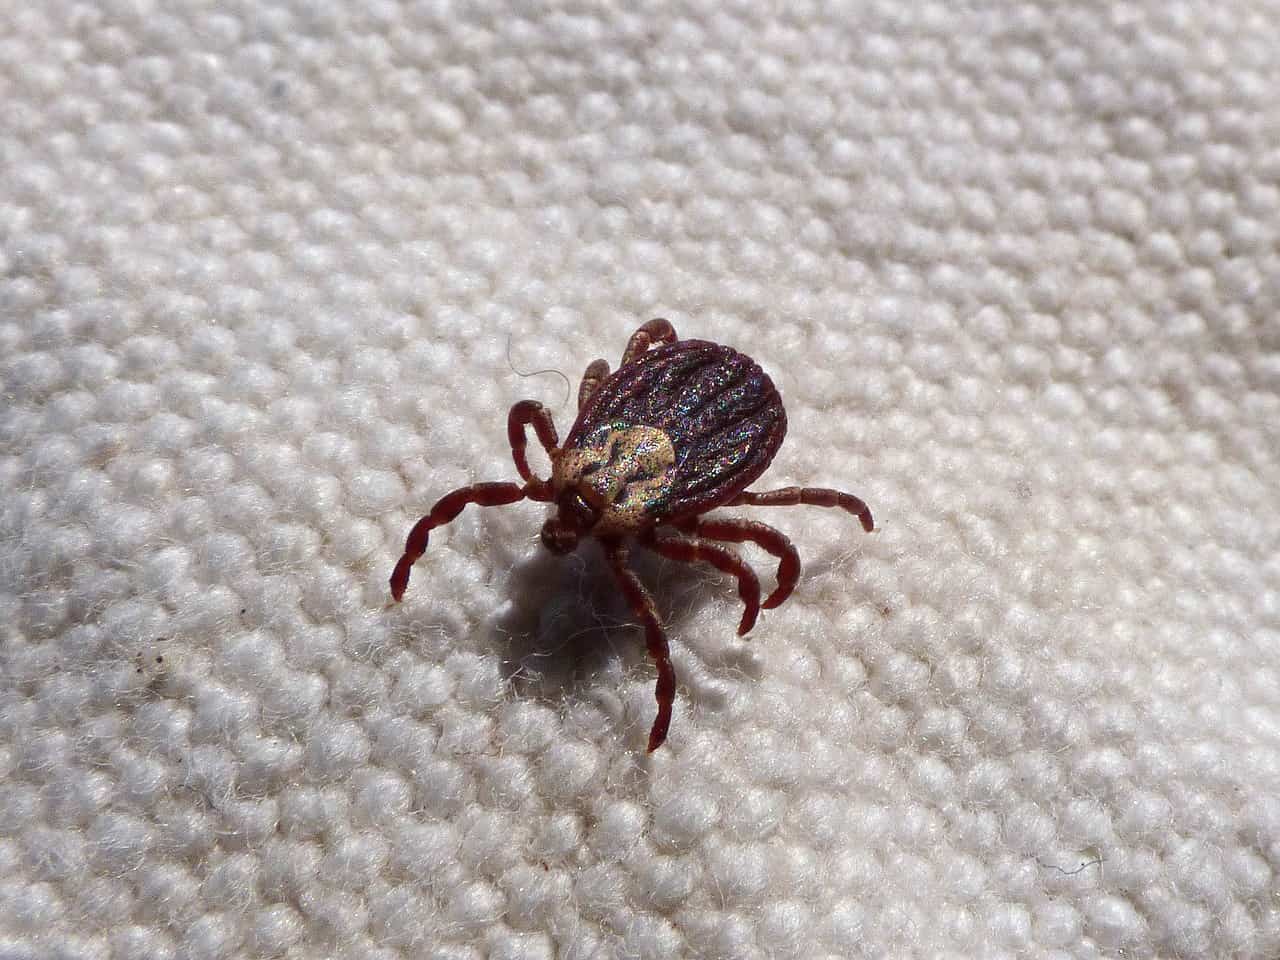 a tick carrying Lyme disease